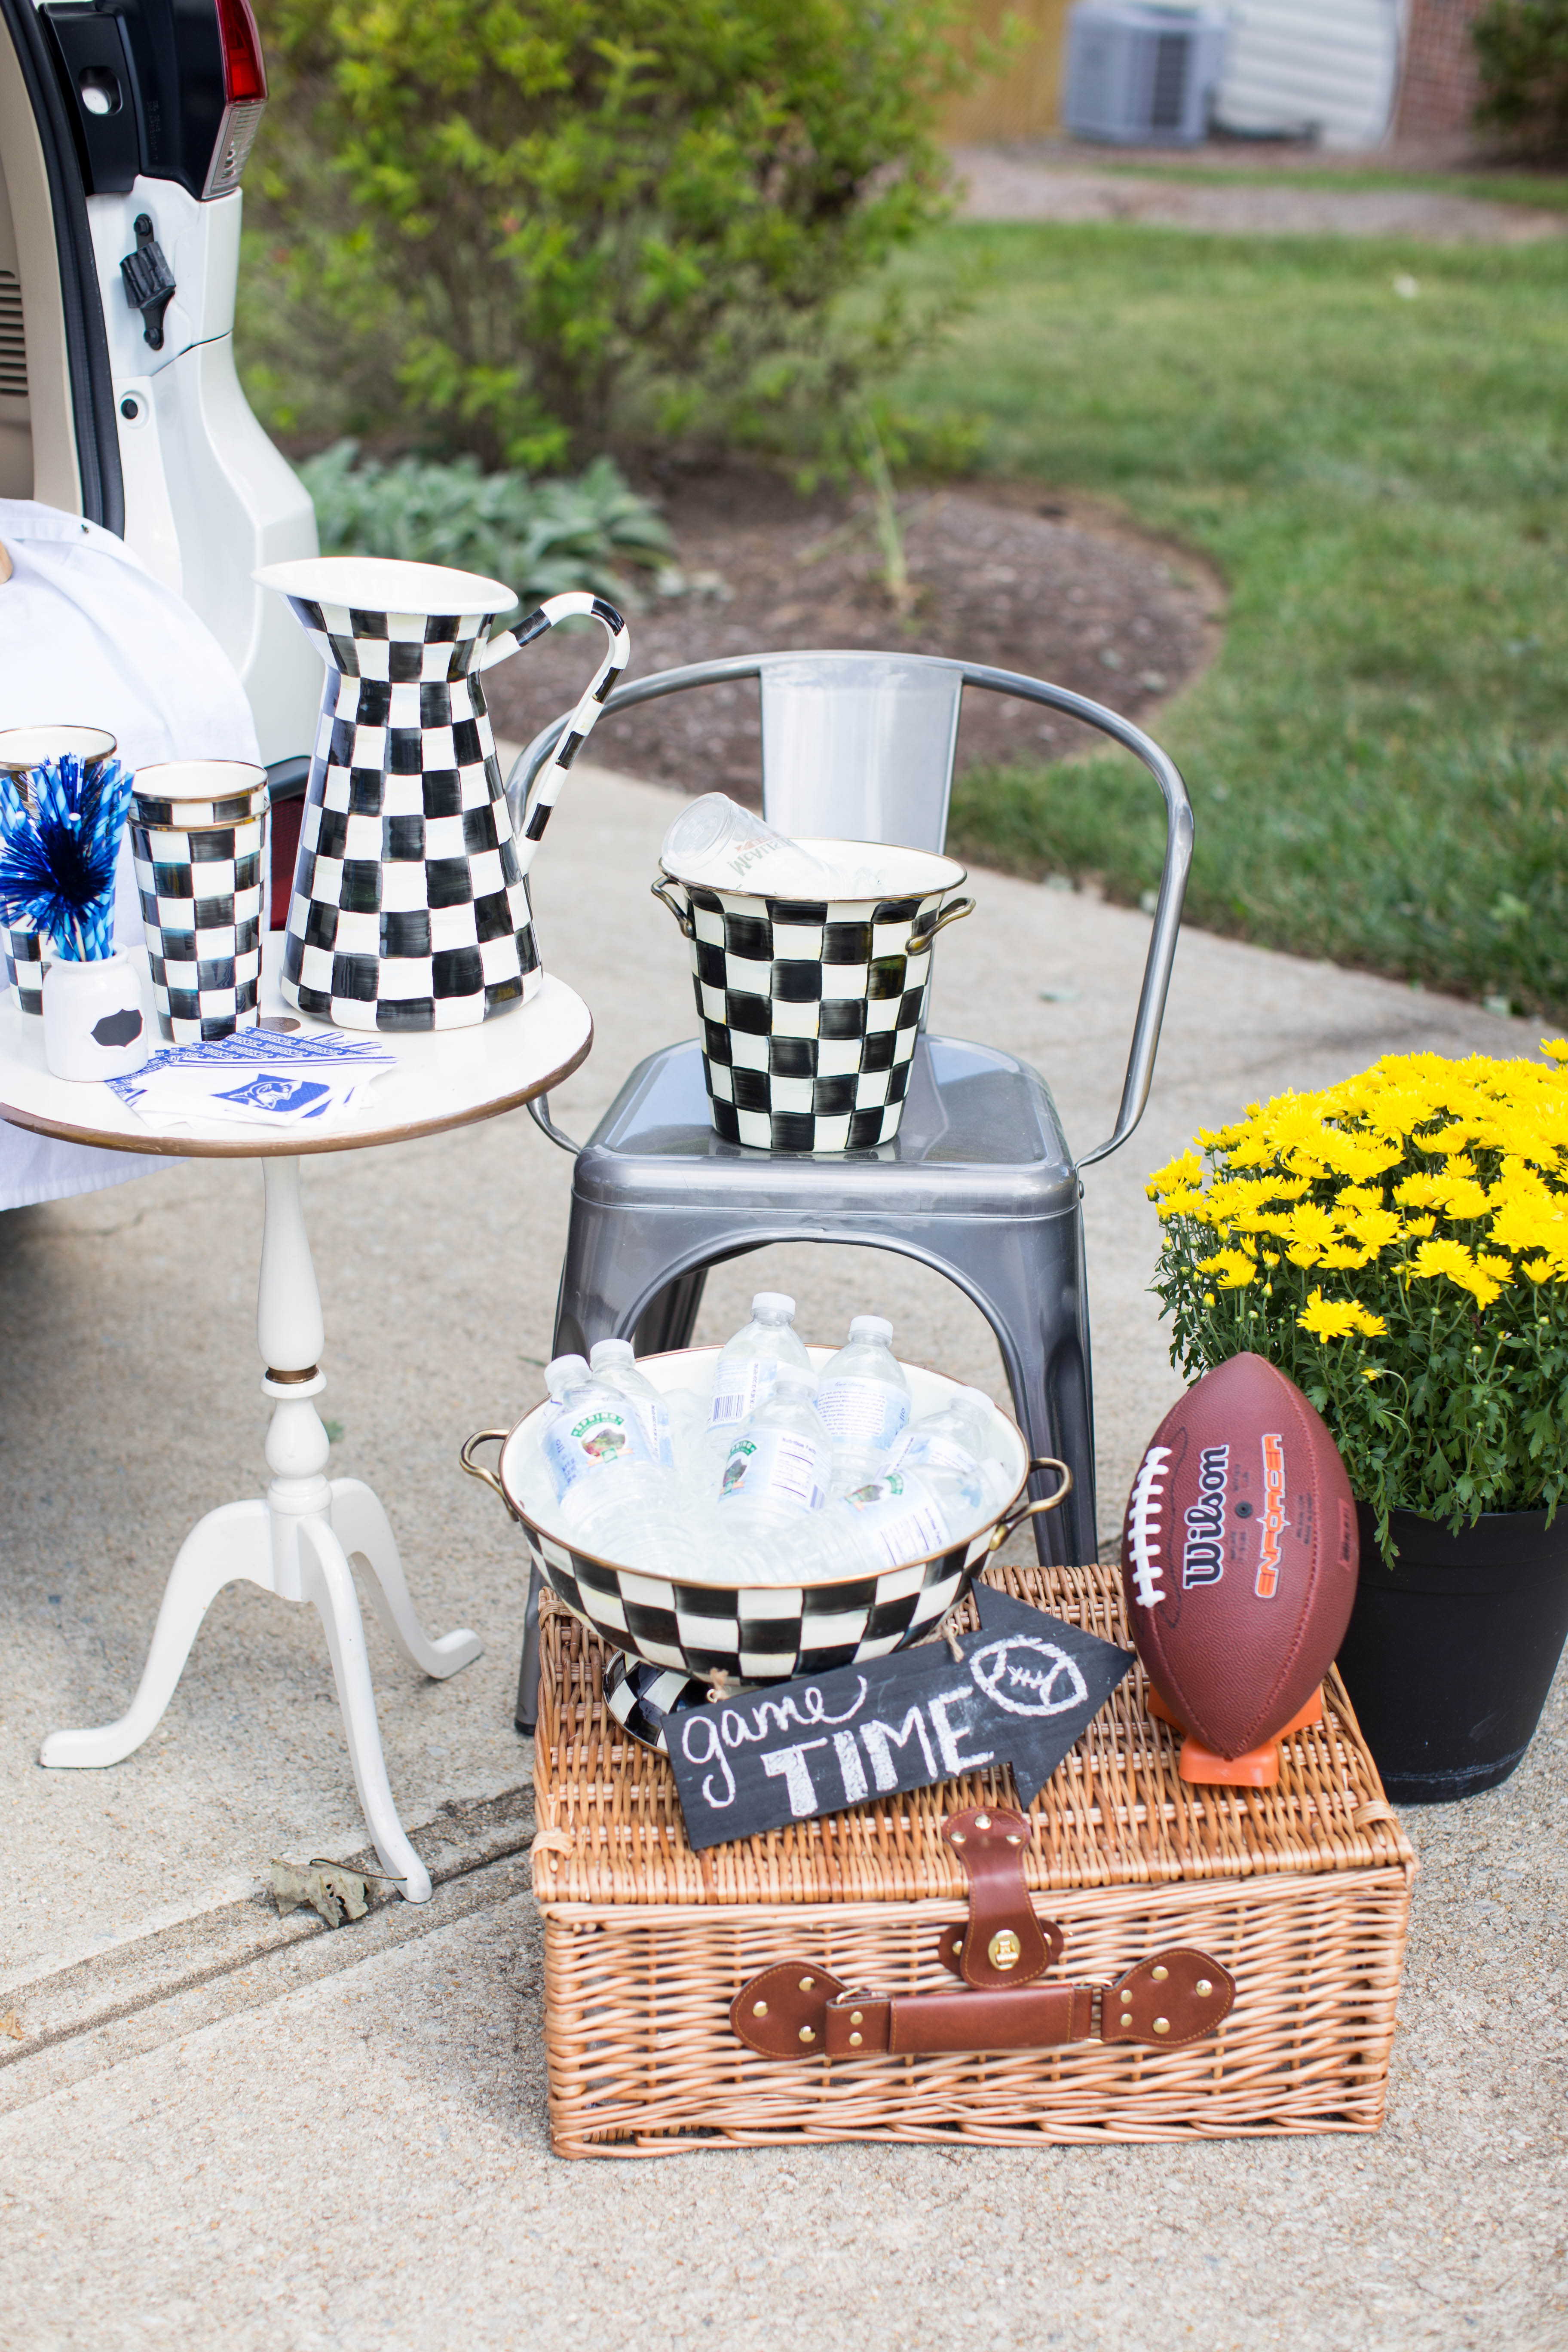 How to: Host a Great Tailgate Party by North Carolina lifestyle blogger Coffee Beans and Bobby Pins